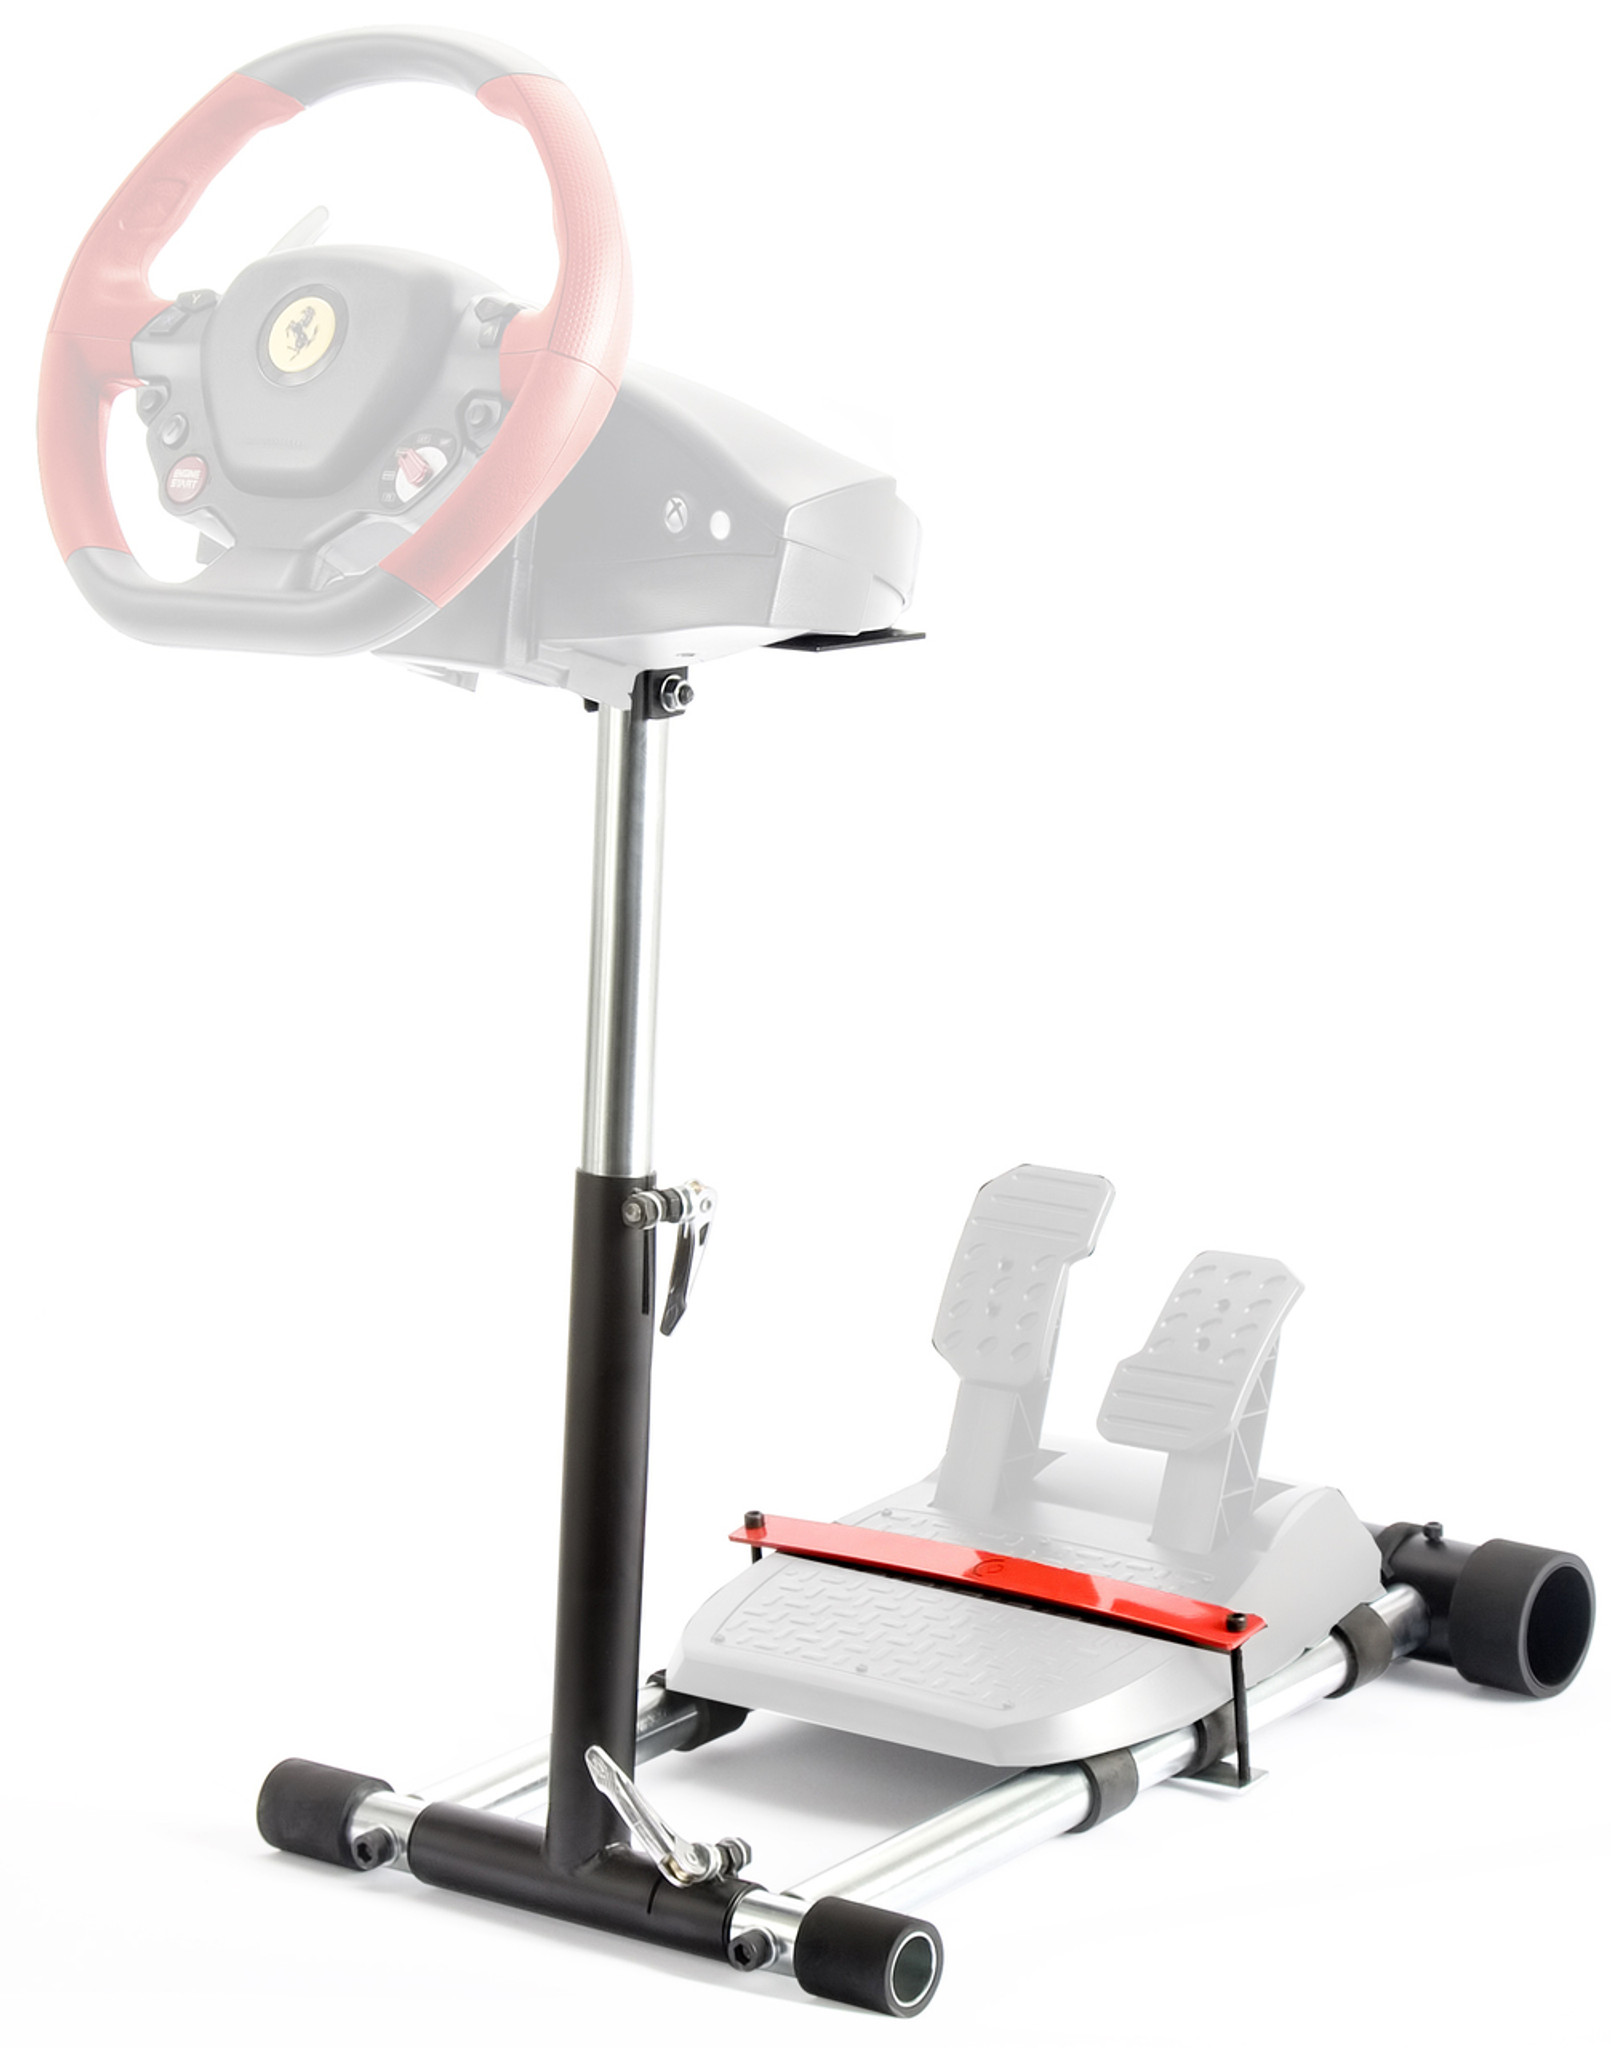 Racing Steering Wheelstand for Original Thrustmaster F458 , F458 Spider ,  T80, T100, RGT, Ferrari GT and F430; Original Wheel Stand Pro V2 Stand:  Wheel/Pedals Not included: : Electronics & Photo